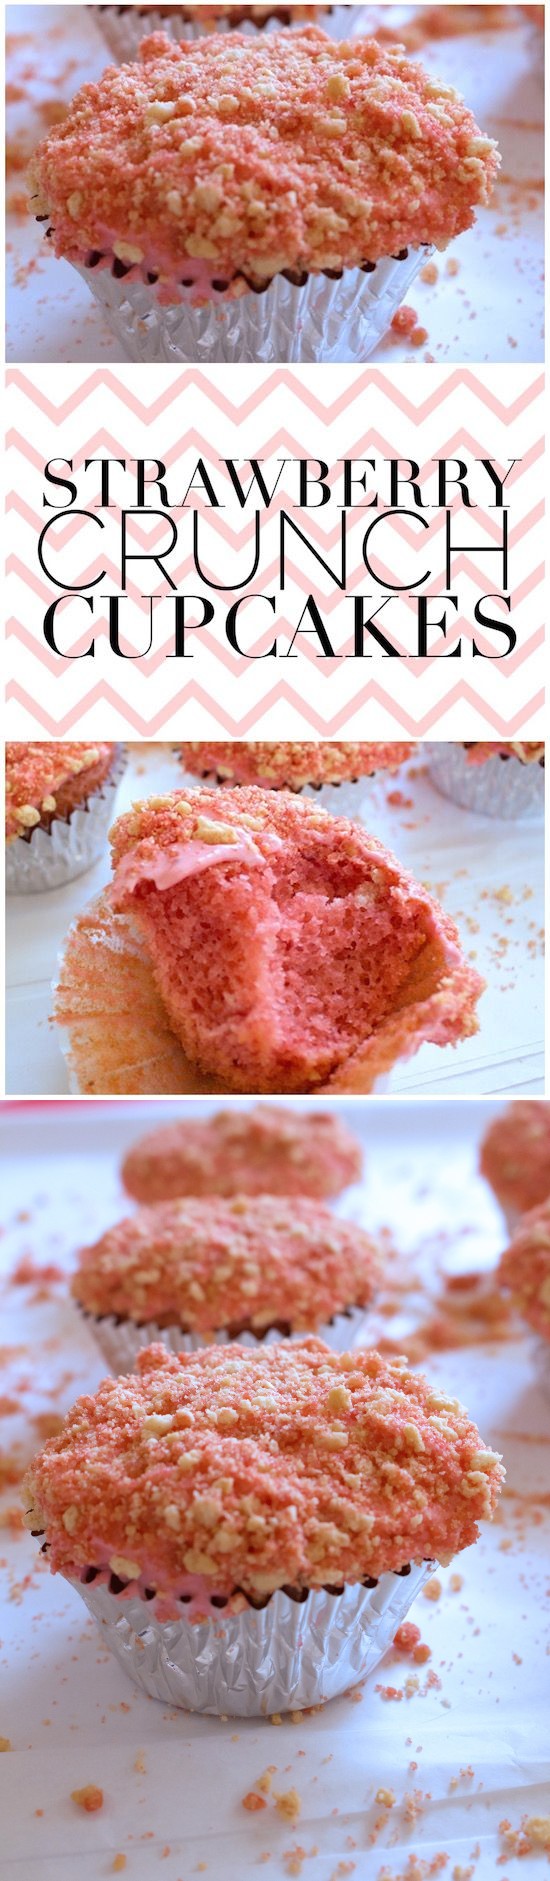 strawberry crunch cup cakes